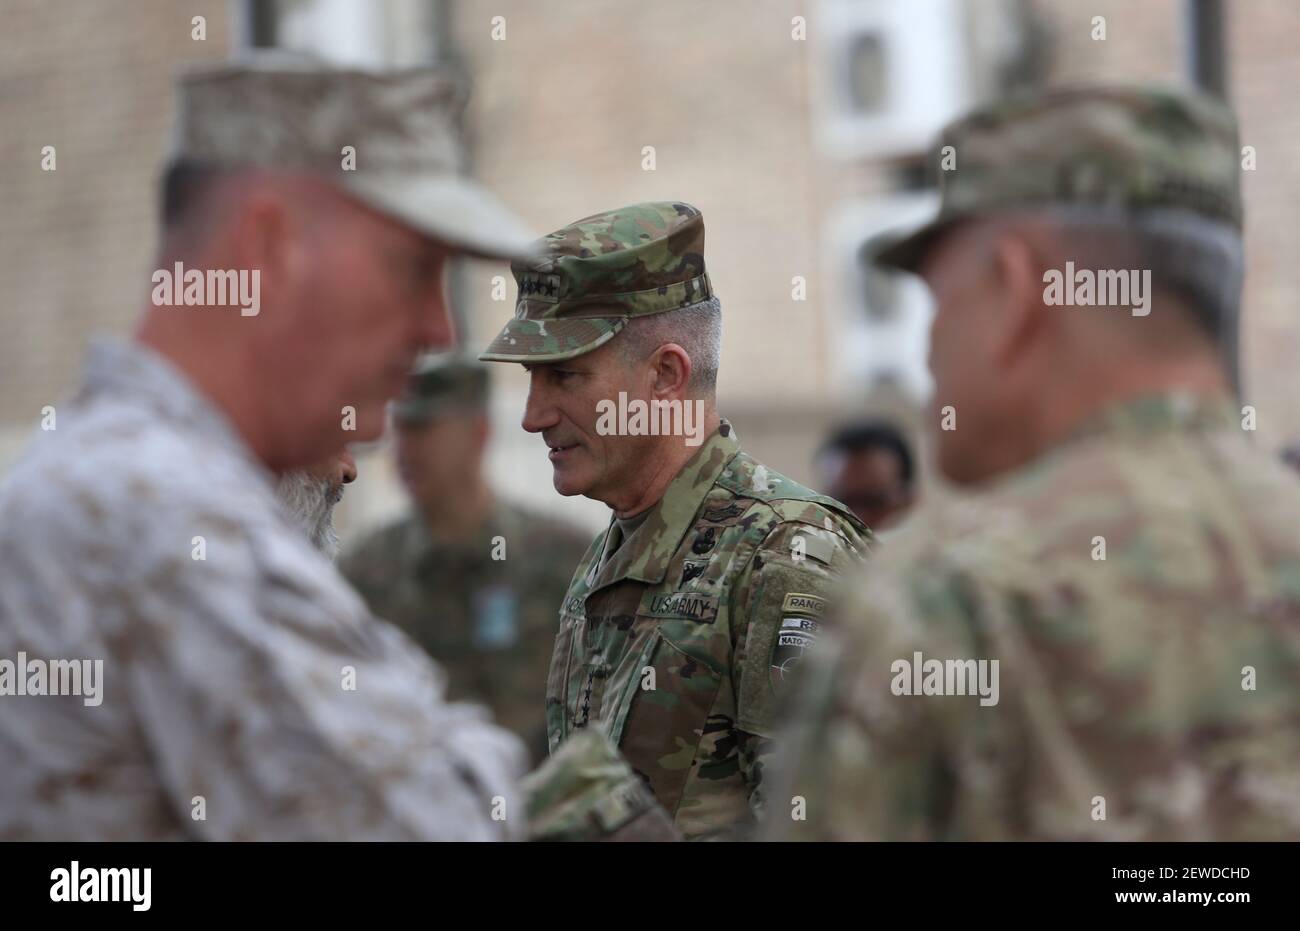 U.S. army General John W. Nicholson, Jr., new commander of the NATO-led Resolute Support (RS) in Afghanistan and U.S. forces, attends a change of command ceremony at the RS headquarters in Kabul, capital of Afghanistan, March 2, 2016. U.S. army General John W. Nicholson, Jr. assumed the command of the NATO-led Resolute Support (RS) in Afghanistan and U.S. forces from his fellow countryman, General John F. Campbell on Wednesday. (Xinhua/Rahmat Gul/pool) (Photo by Xinhua/Sipa USA) Stock Photo